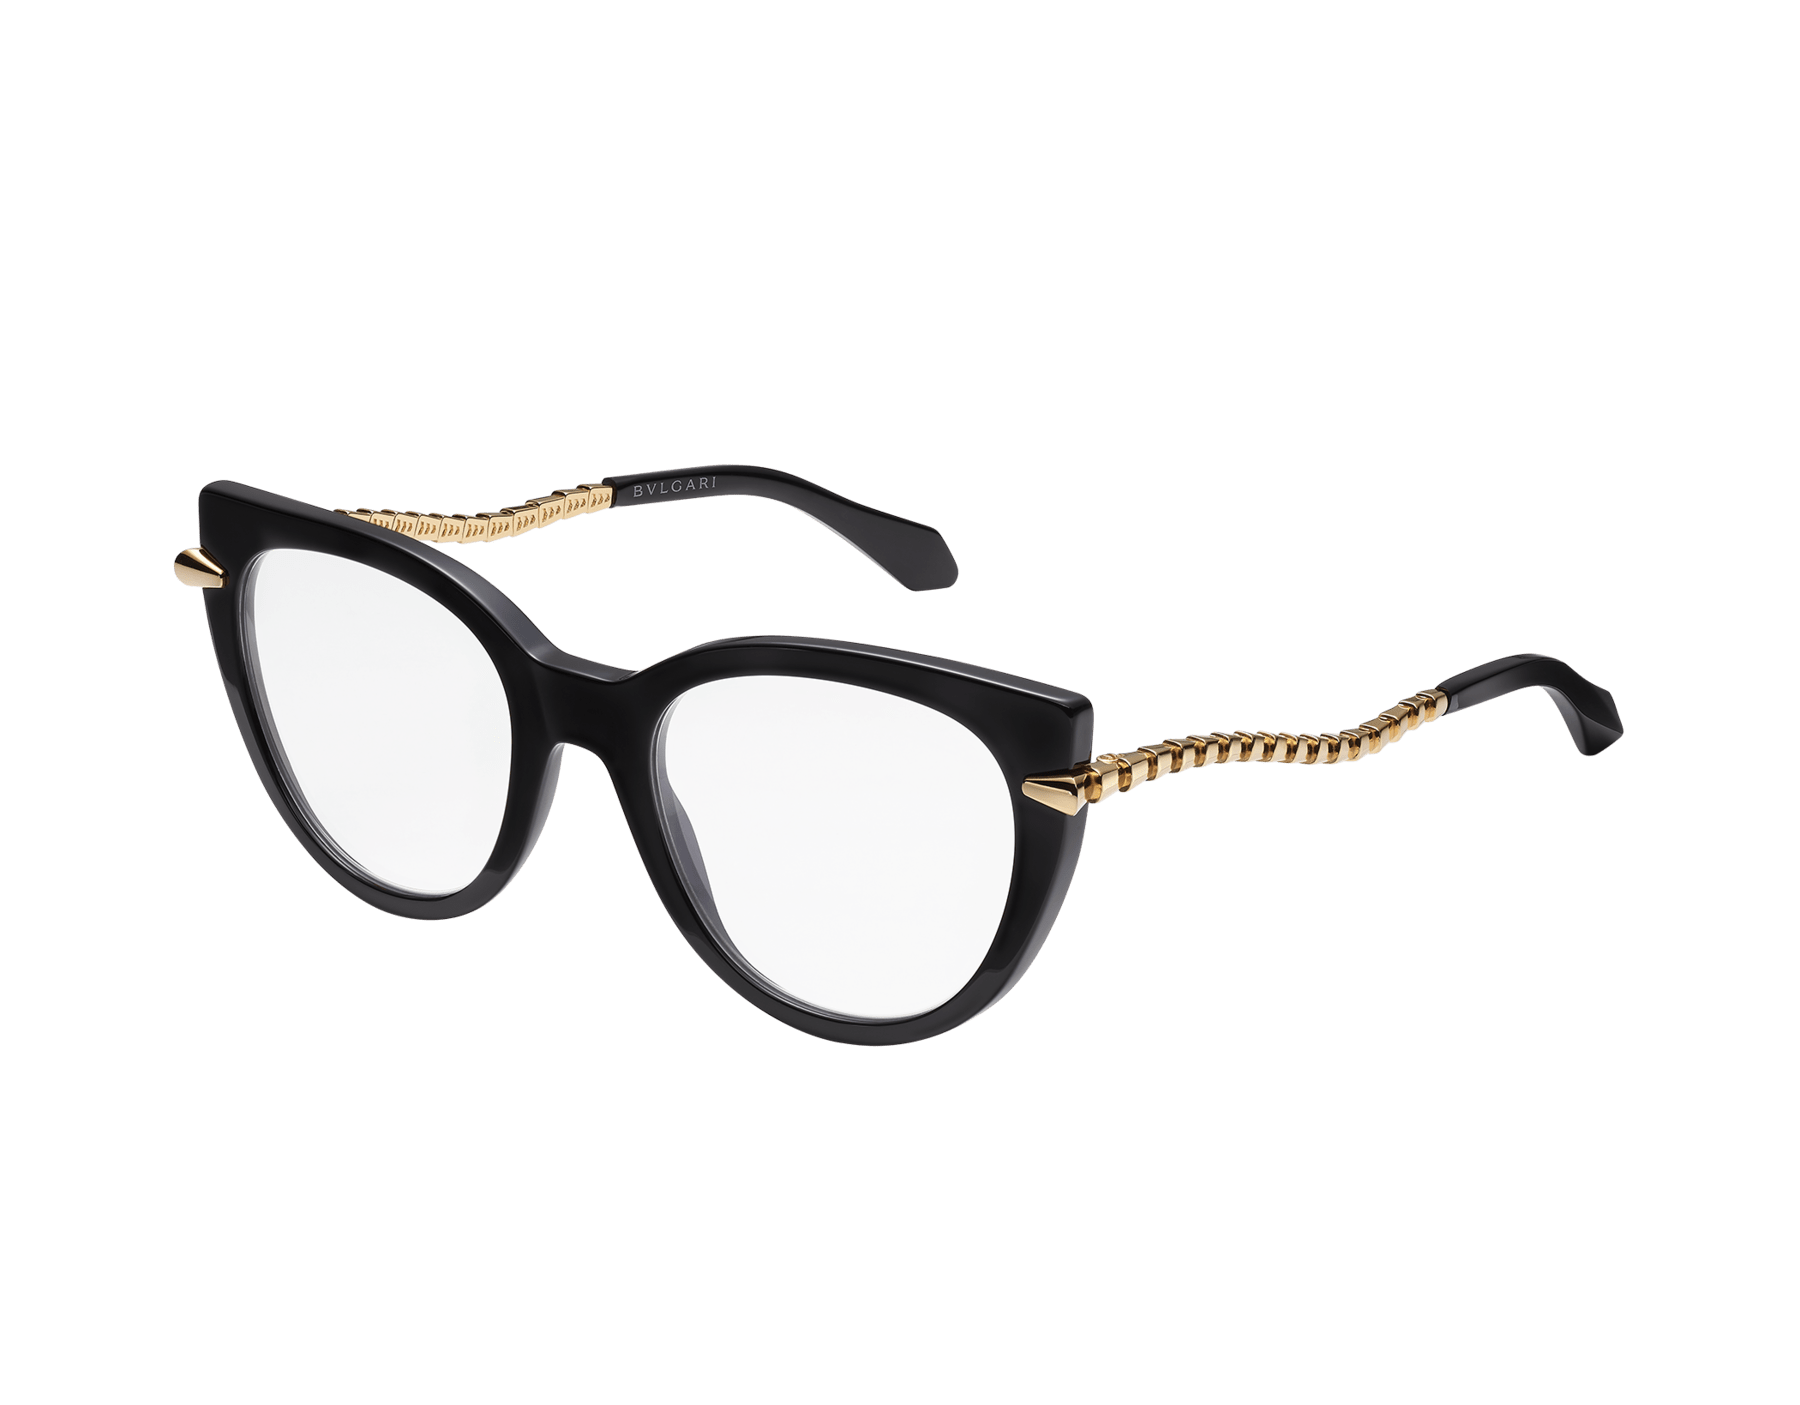 Serpenti Viper cat-eye acetate glasses with gold-finished temples and blue light filter lenses 904300 image 1